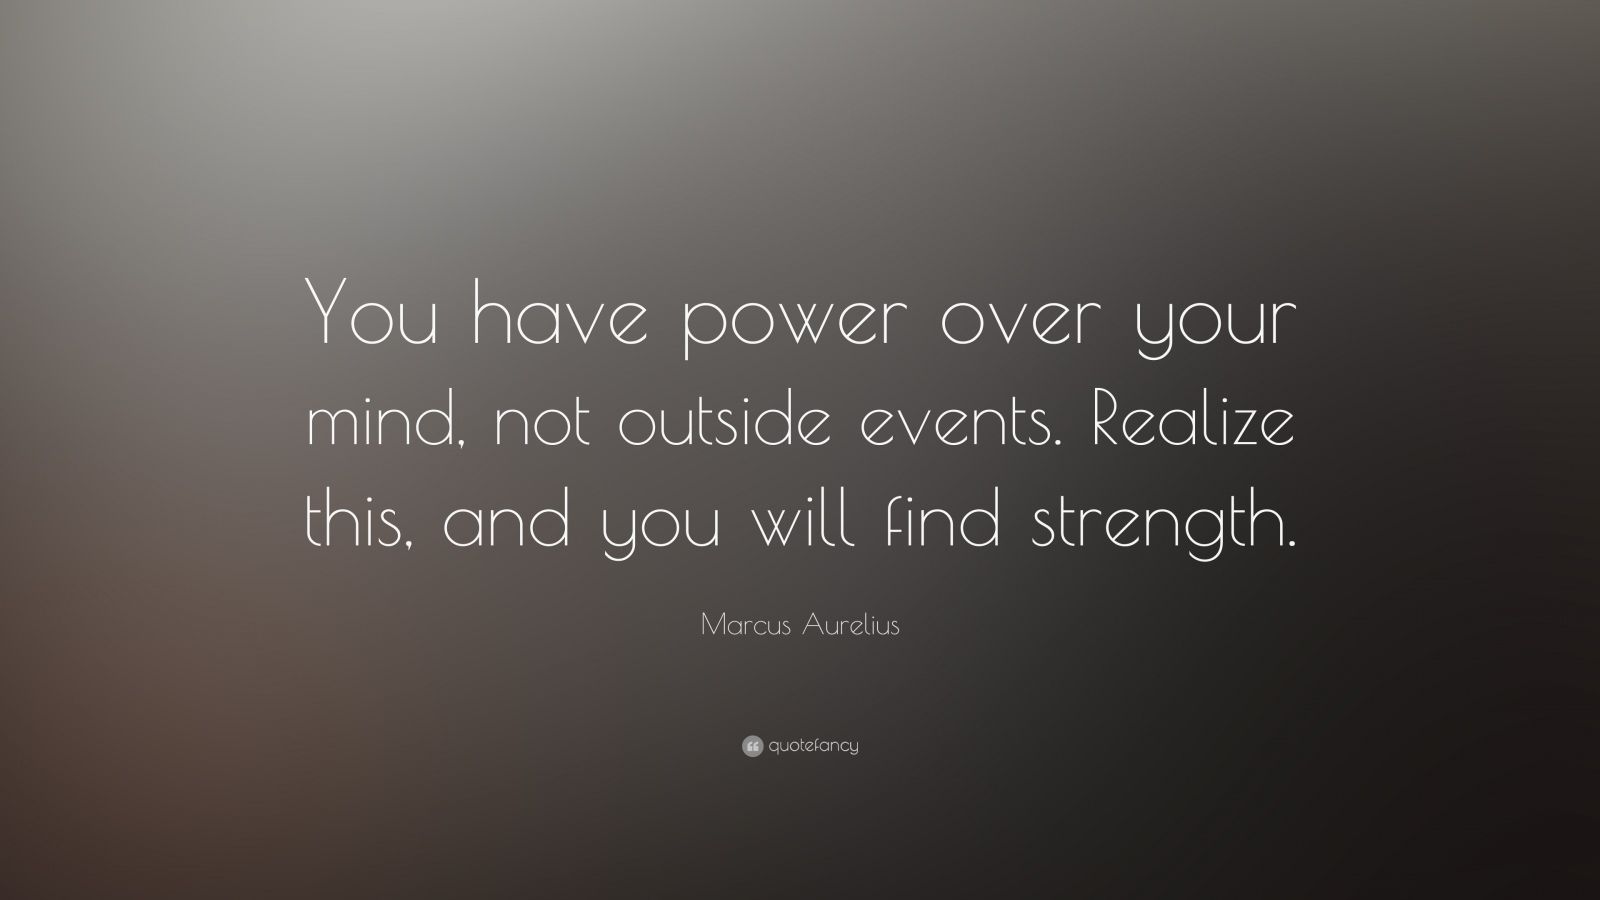 Marcus Aurelius Quote: “You have power over your mind, not outside events. Realize this, and you will find strength.” (24 wallpaper)